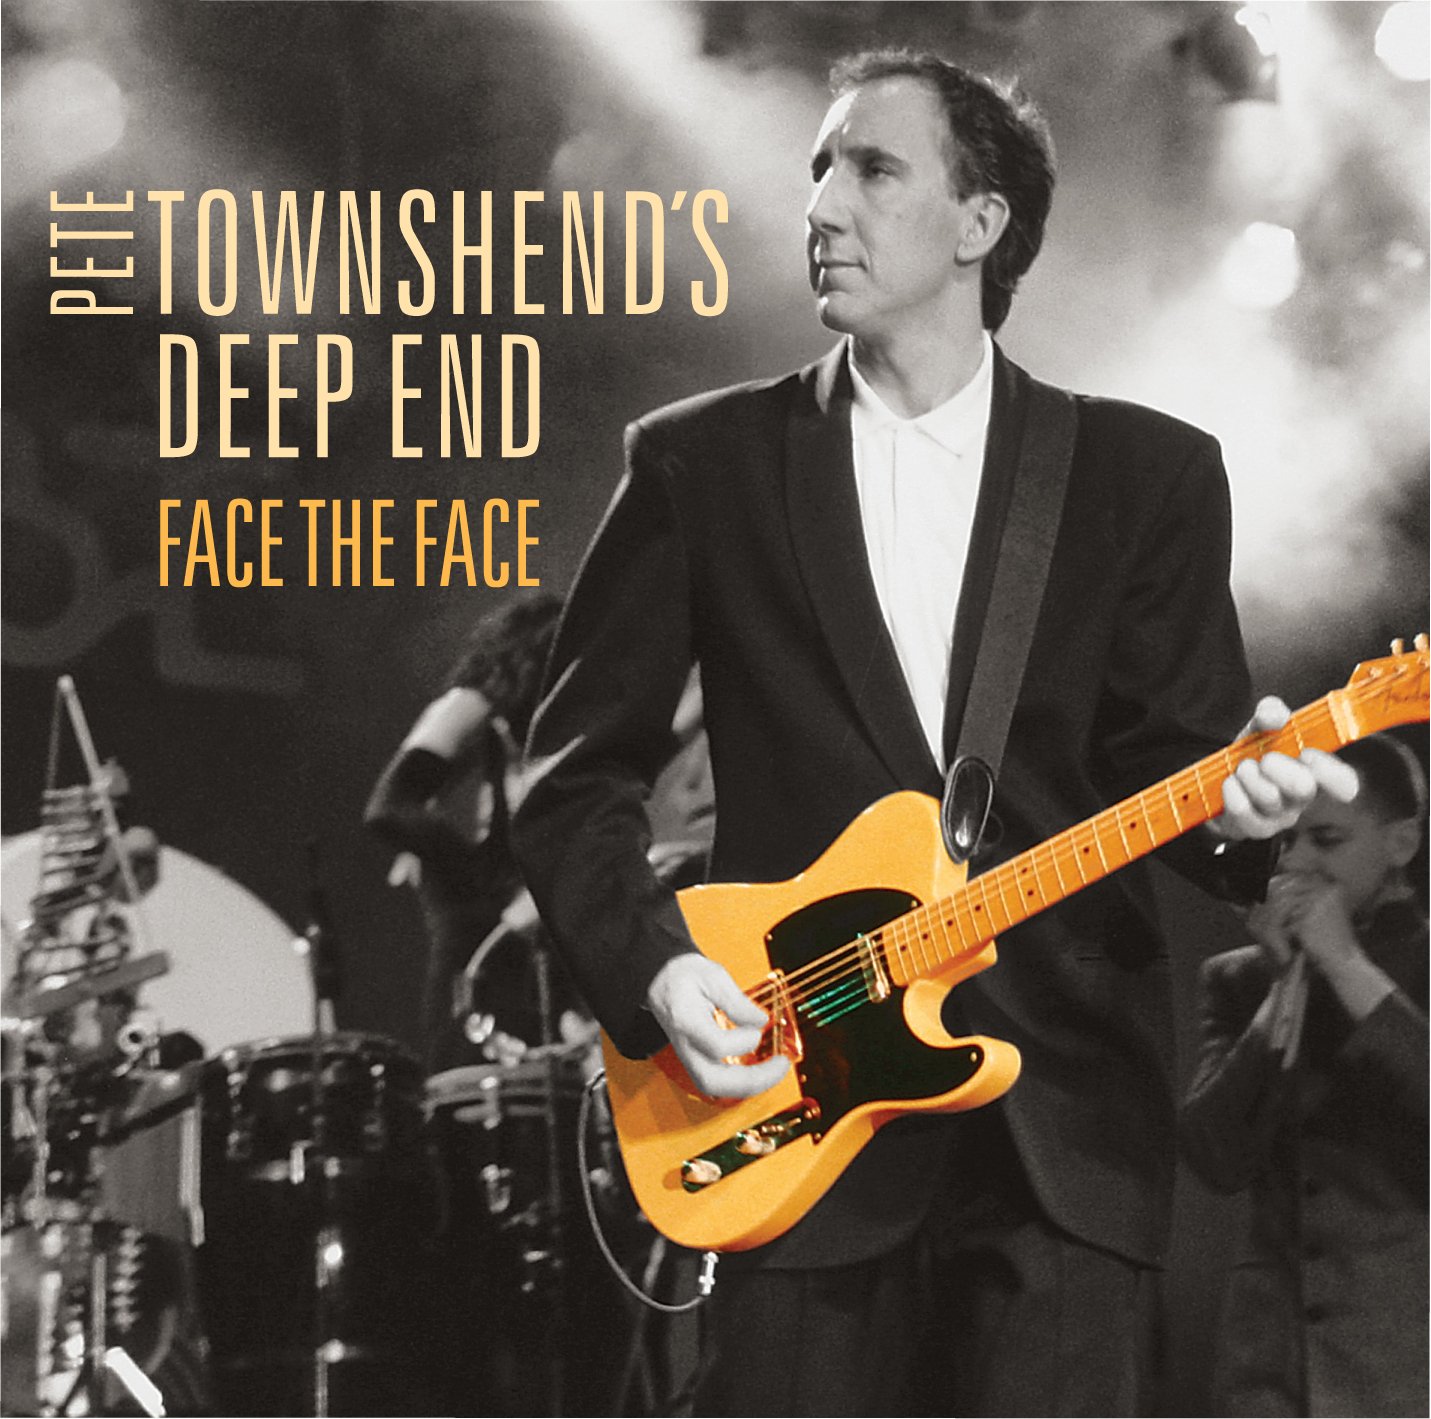 Pete Townshend’s Deep End: Face The Face (DVD/CD) on MovieShack